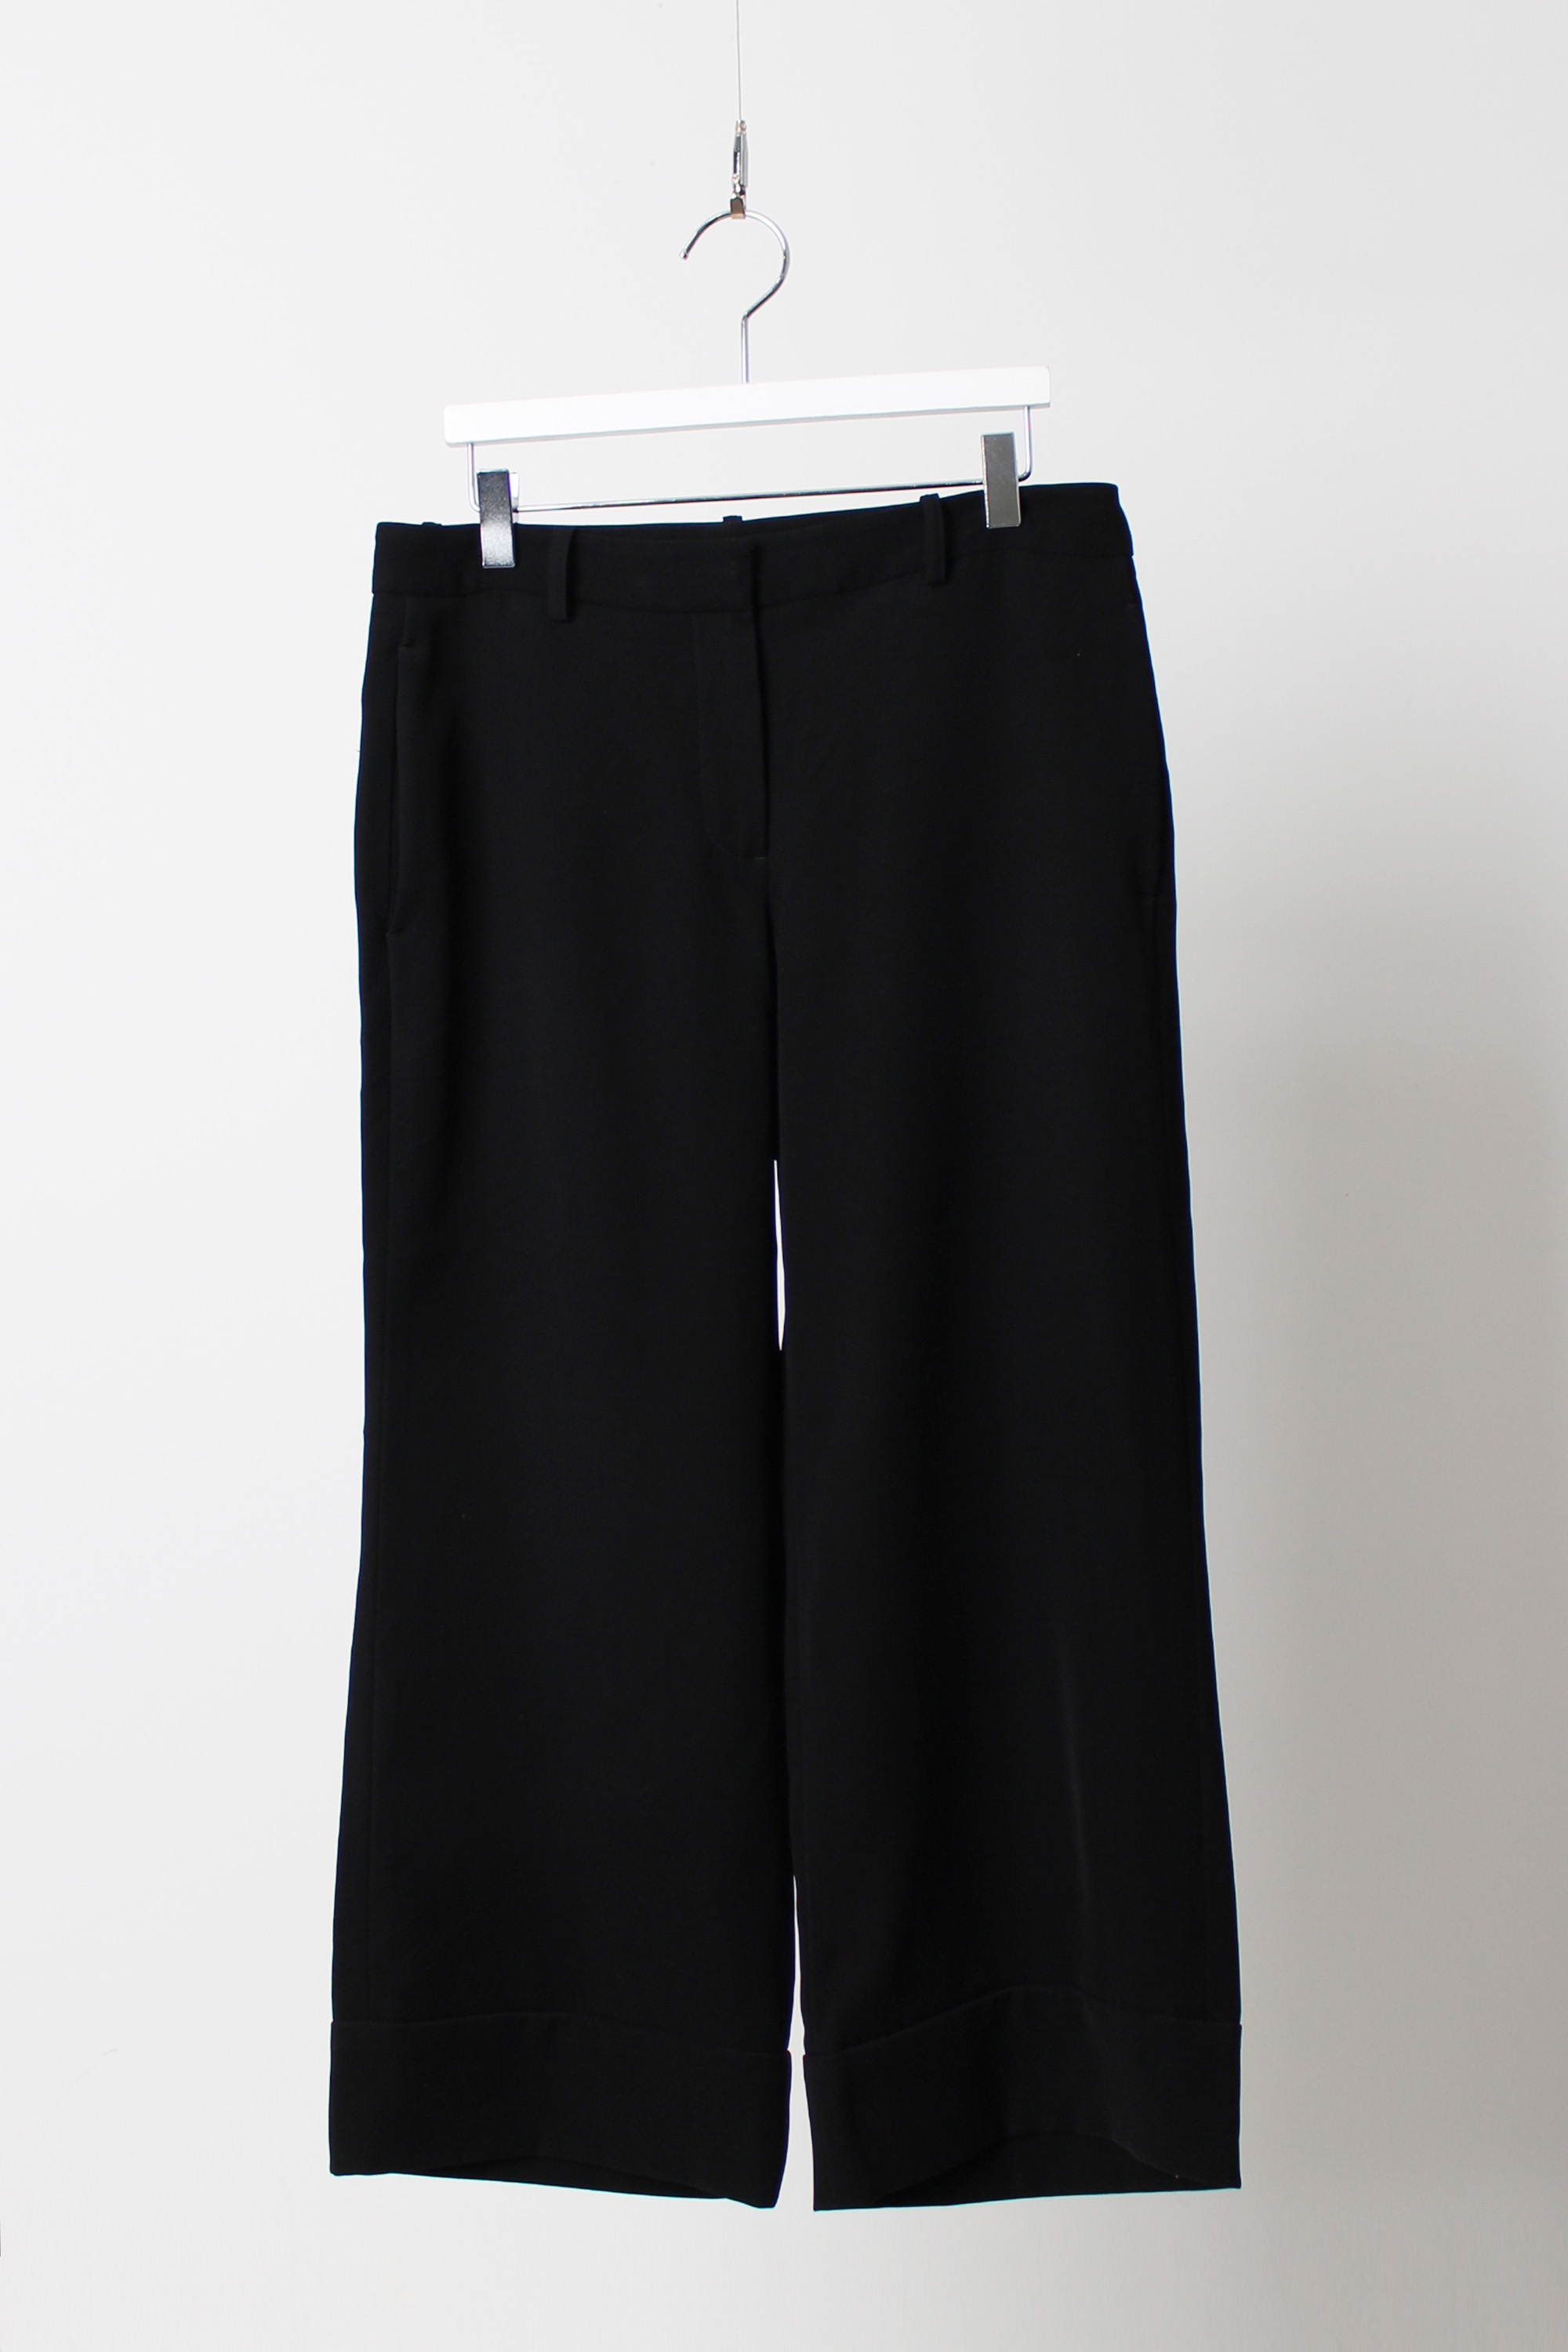 Theory luxe Crop Pants